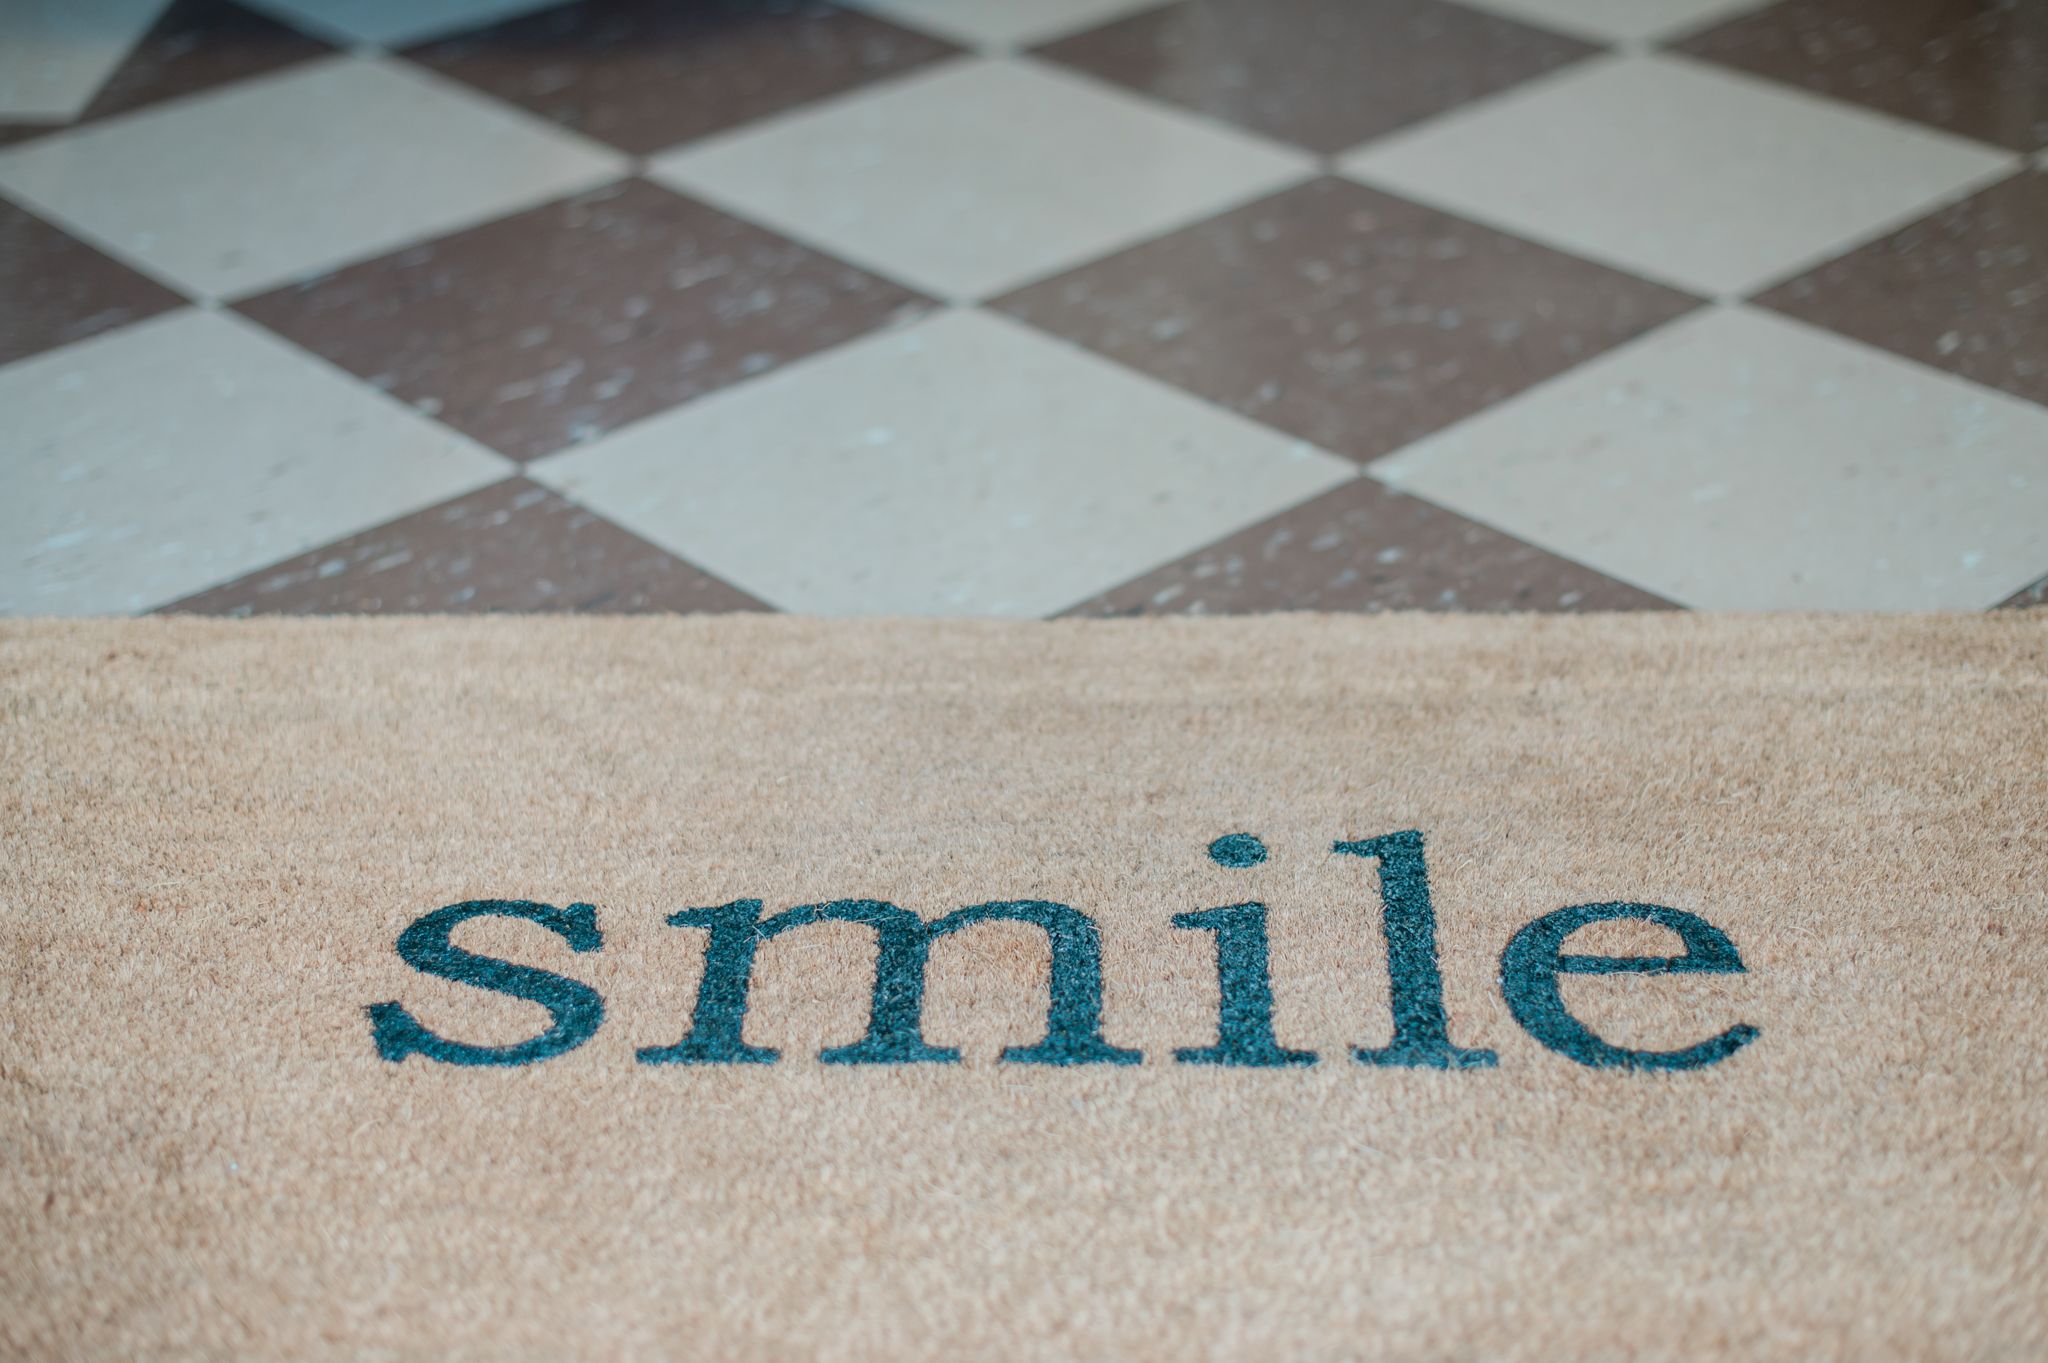 A floor mat that says "Smile" in the doorway of Nunn Denistry in High Point, NC.